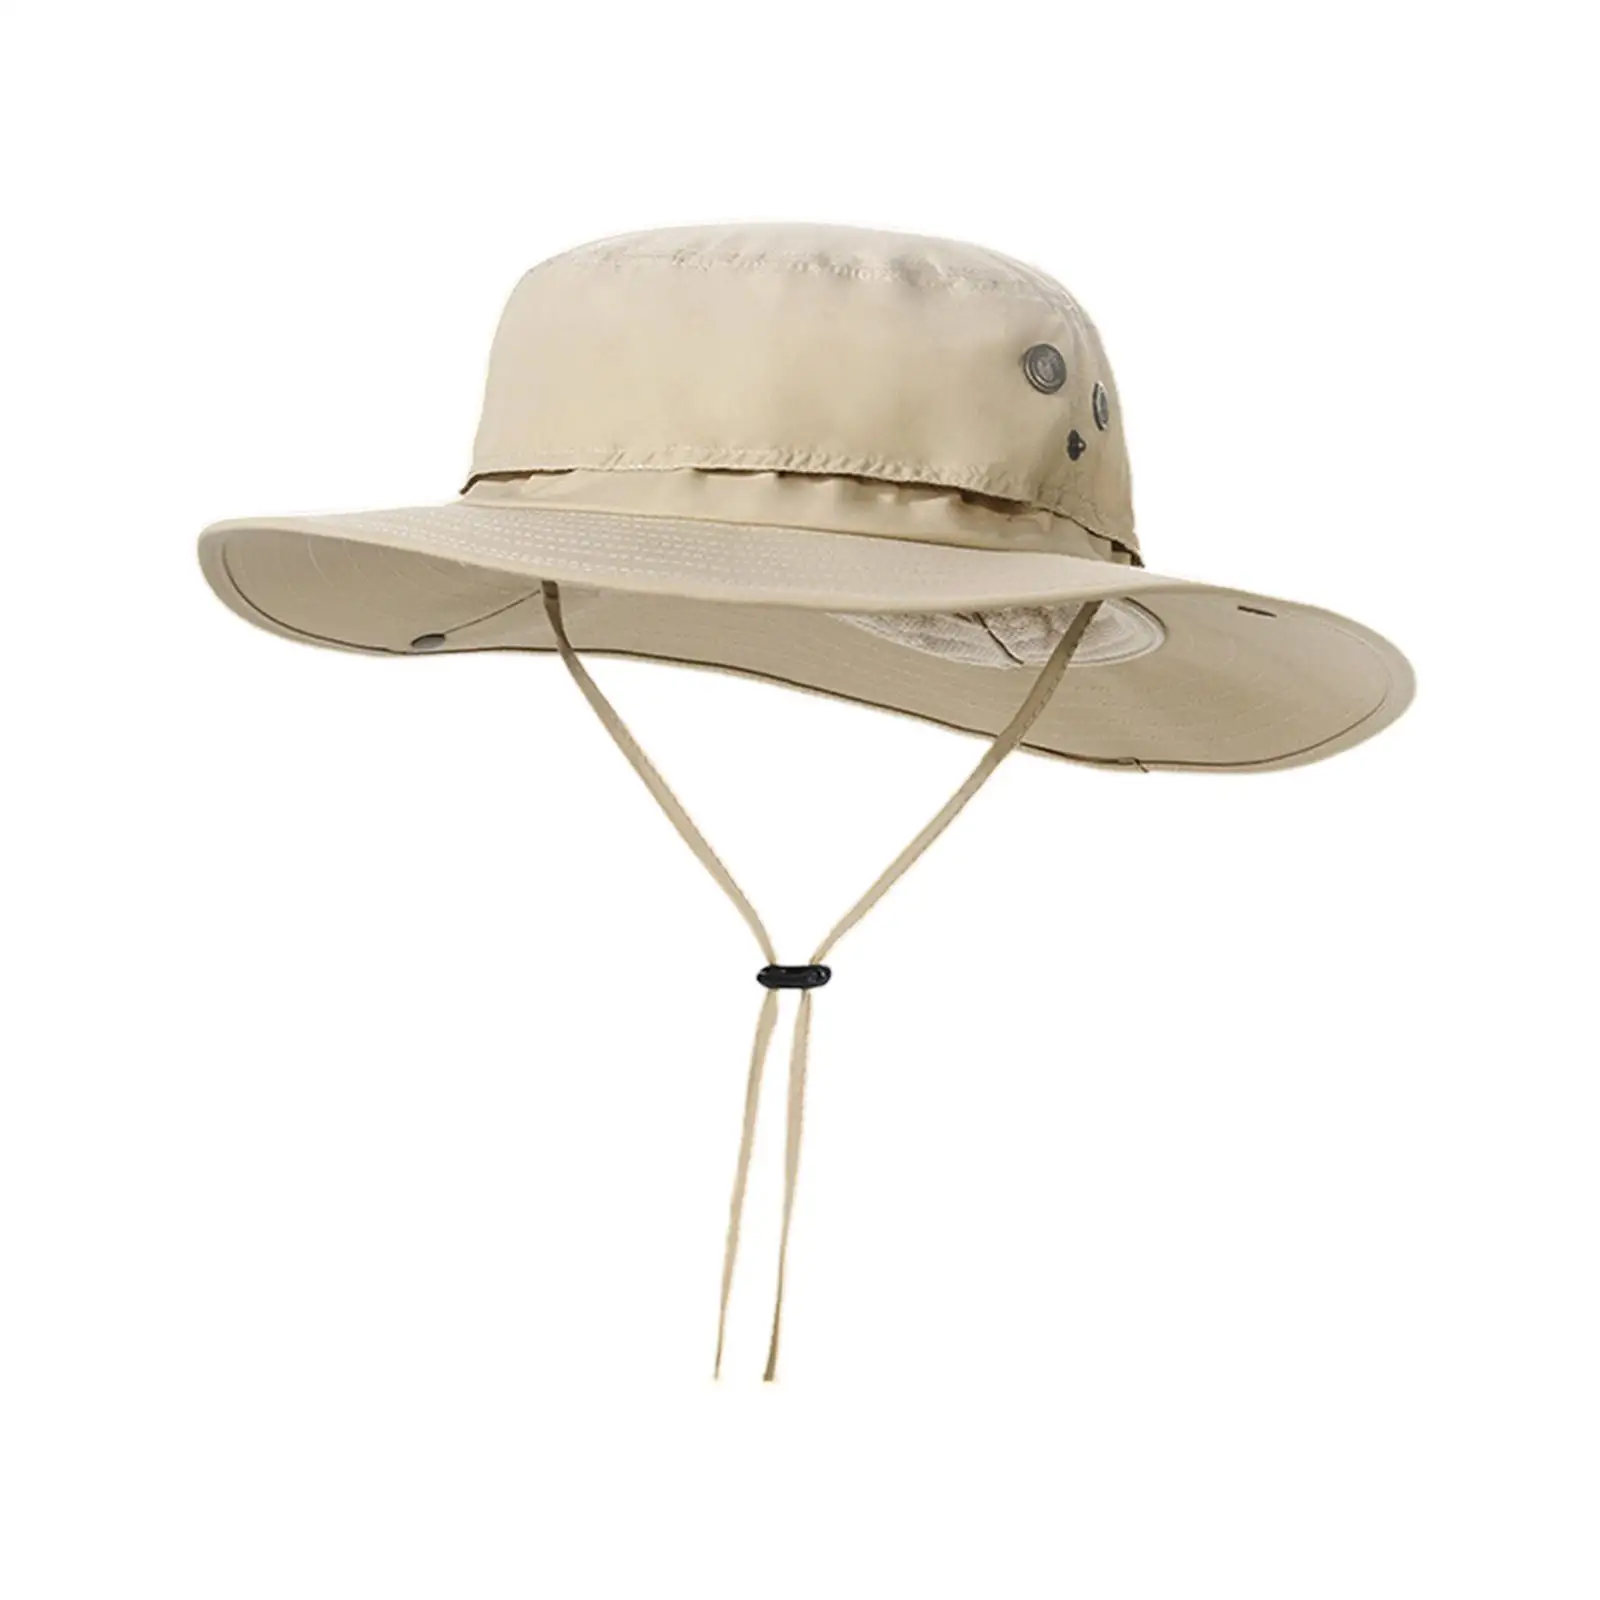 Bucket Hat Sunhat with Strings Adjustable Foldable Breathable Wide Brim Sun Hat for Fishing Hat Camping Beach Hiking Adult